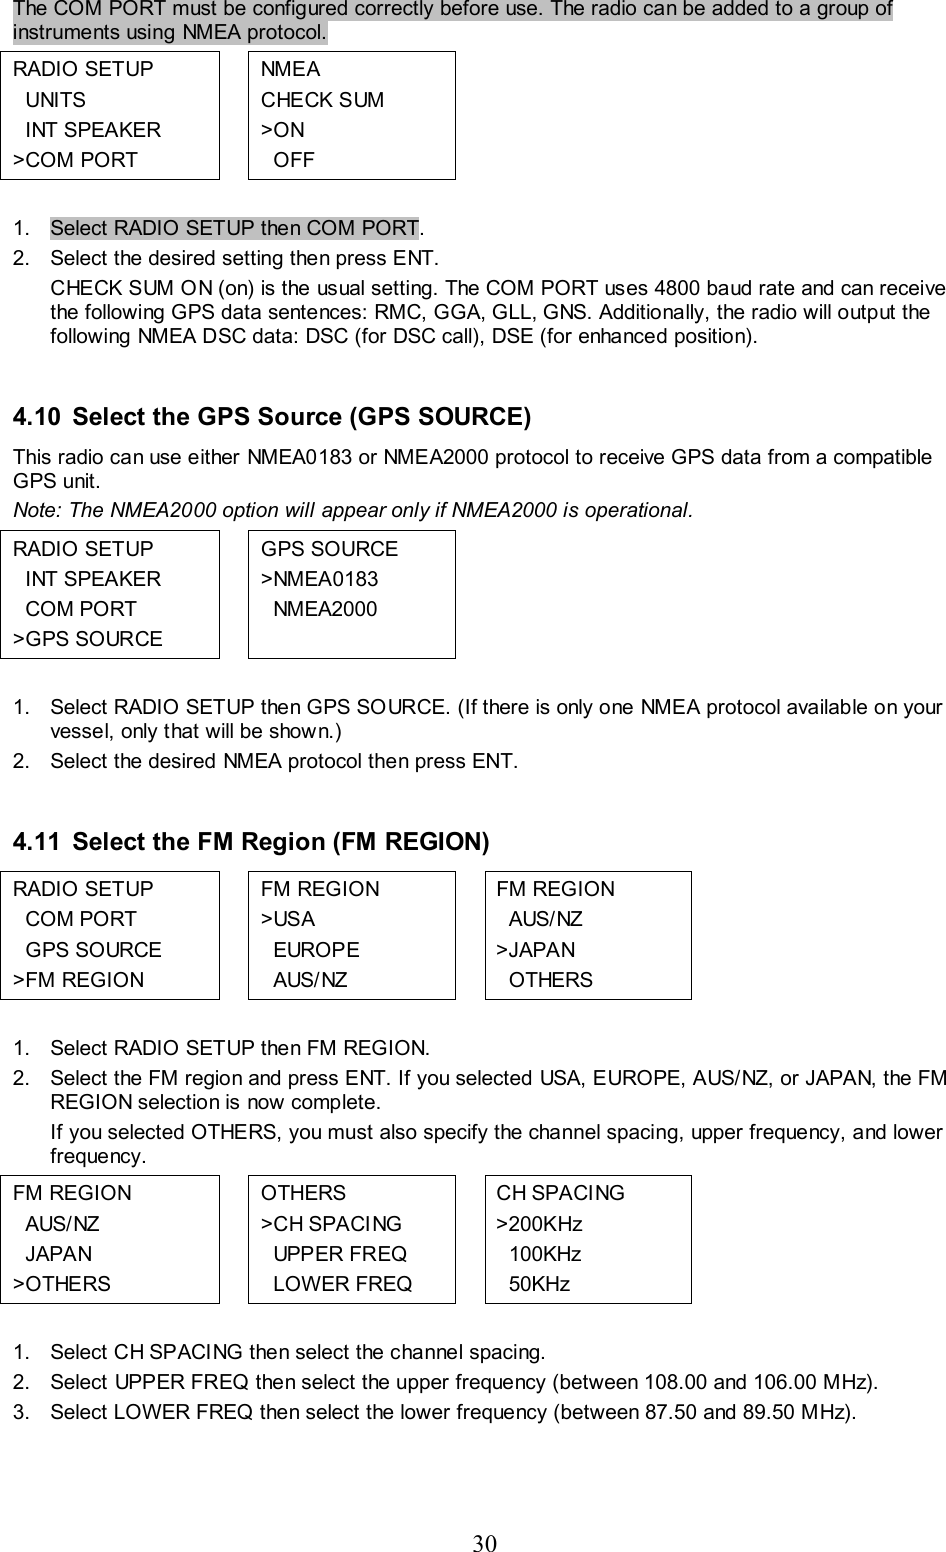 30 The COM PORT must be configured correctly before use. The radio can be added to a group of instruments using NMEA protocol. RADIO SETUP   UNITS   INT SPEAKER &gt;COM PORT  NME A  CHECK SUM &gt;ON   OFF       1.  Select RADIO SETUP then COM PORT. 2.  Select the desired setting then press ENT. CHECK SUM ON (on) is the usual setting. The COM PORT uses 4800 baud rate and can receive the following GPS data sentences: RMC, GGA, GLL, GNS. Additionally, the radio will output the following NMEA DSC data: DSC (for DSC call), DSE (for enhanced position).  4.10 Select the GPS Source (GPS SOURCE) This radio can use either NMEA0183 or NMEA2000 protocol to receive GPS data from a compatible GPS unit.  Note: The NMEA2000 option will appear only if NMEA2000 is operational. RADIO SETUP   INT SPEAKER   COM PORT &gt;GPS SOURCE  GPS SOURCE &gt;NMEA0183   NMEA2000         1.  Select RADIO SETUP then GPS SOURCE. (If there is only one NMEA protocol available on your vessel, only that will be shown.) 2.  Select the desired NMEA protocol then press ENT.  4.11 Select the FM Region (FM REGION)  RADIO SETUP    COM PORT   GPS SOURCE &gt;FM REGION  FM REGION &gt;USA   EUROPE   AUS/NZ  FM REGION   AUS/NZ &gt;JAPAN   OTHERS    1.  Select RADIO SETUP then FM REGION.  2.  Select the FM region and press ENT. If you selected USA, EUROPE, AUS/NZ, or JAPAN, the FM REGION selection is now complete. If you selected OTHERS, you must also specify the channel spacing, upper frequency, and lower frequency. FM REGION   AUS/NZ   JAPAN &gt;OTHERS  OTHERS &gt;C H SPACI NG   UPPER FREQ   LOWER FREQ  CH SPACING &gt;200KHz   100KHz   50KHz    1.  Select CH SPACING then select the channel spacing. 2.  Select UPPER FREQ then select the upper frequency (between 108.00 and 106.00 MHz).  3.  Select LOWER FREQ then select the lower frequency (between 87.50 and 89.50 MHz).   